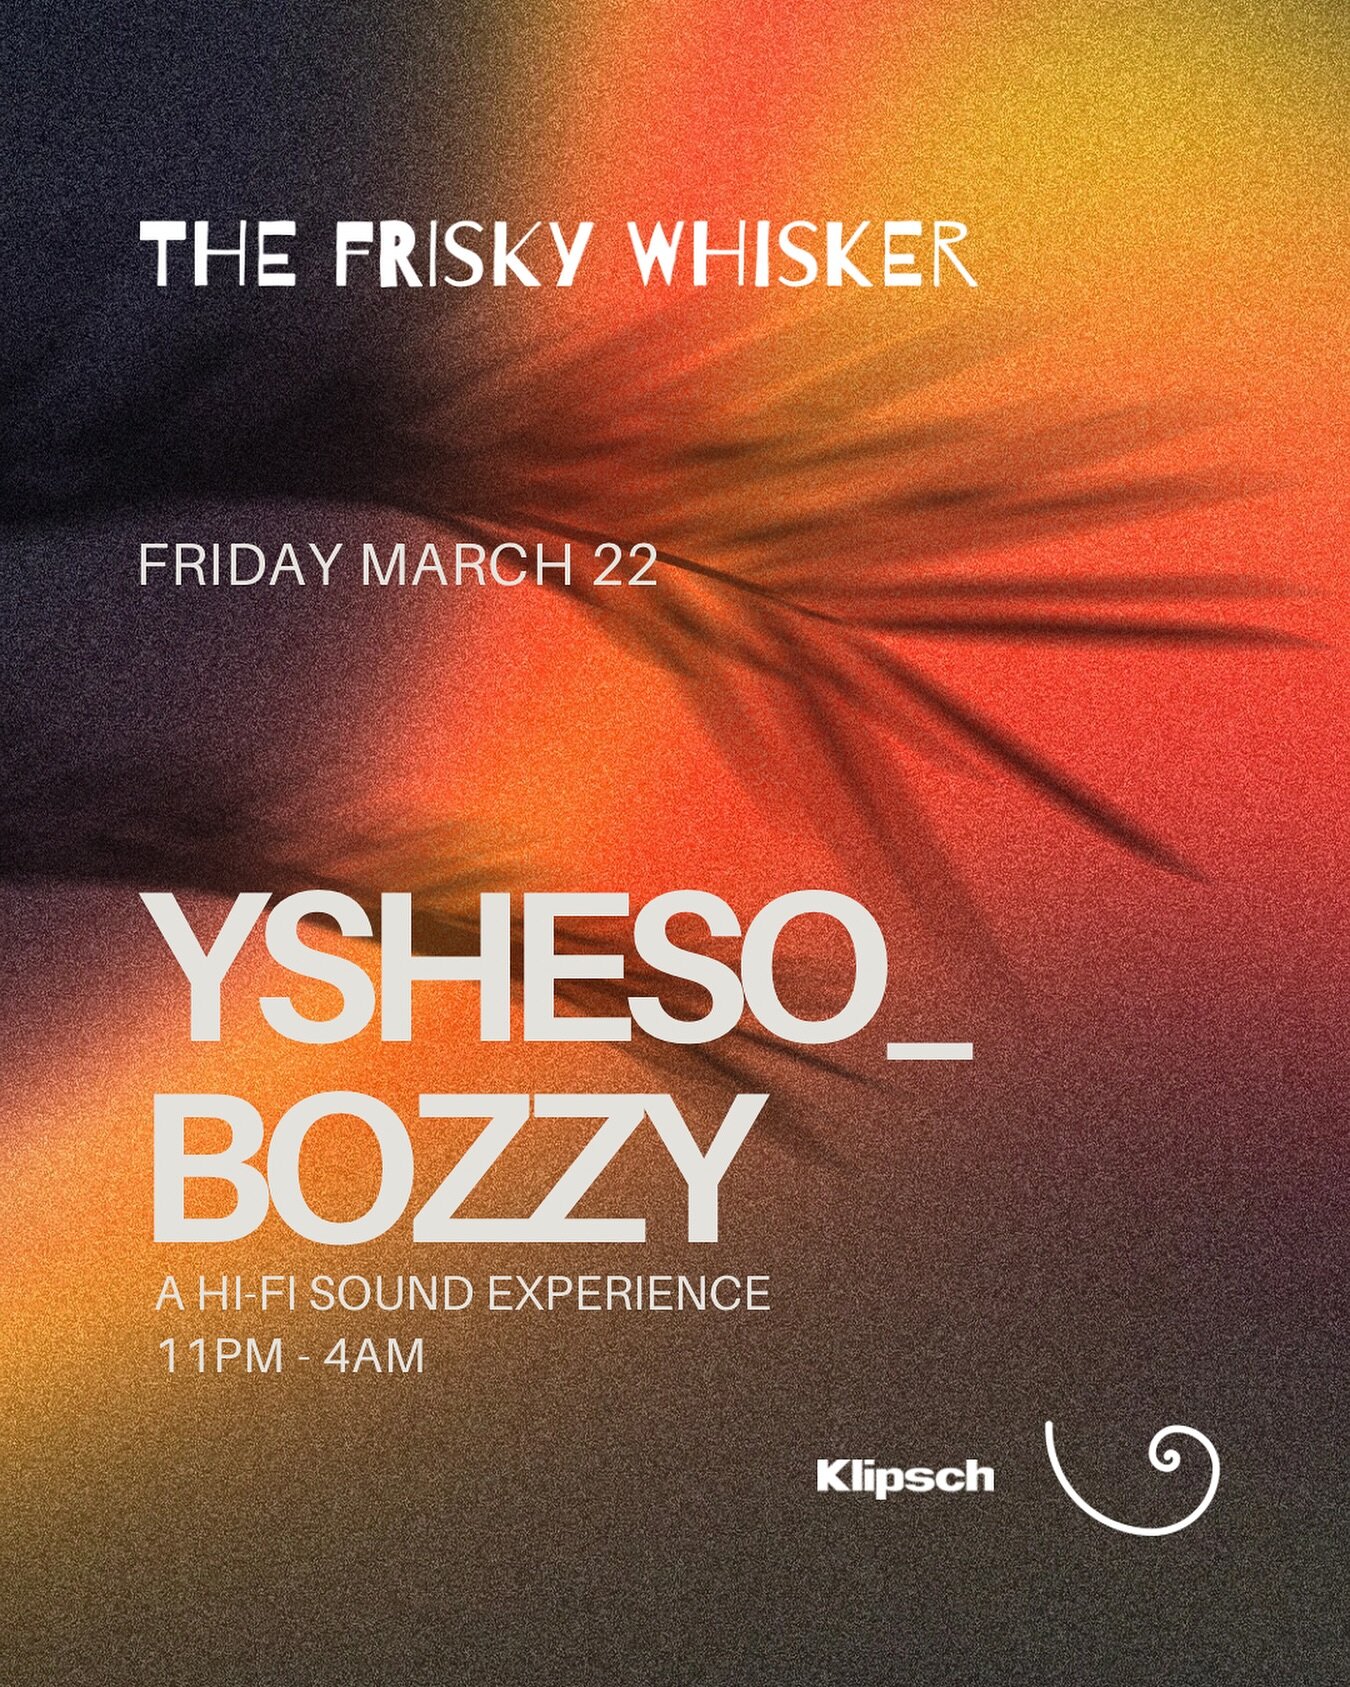 Tonight we welcome back 2 of ATLs most sought after artists/djs, @ysheso____ &amp; @bozzy_dj to the Sound Gallery. It&rsquo;s gonna be VIBE 

HiFi Sound experience All night @klipschaudio 

No cover until 12am , $10 After

#getfrisky #hifi #house #de